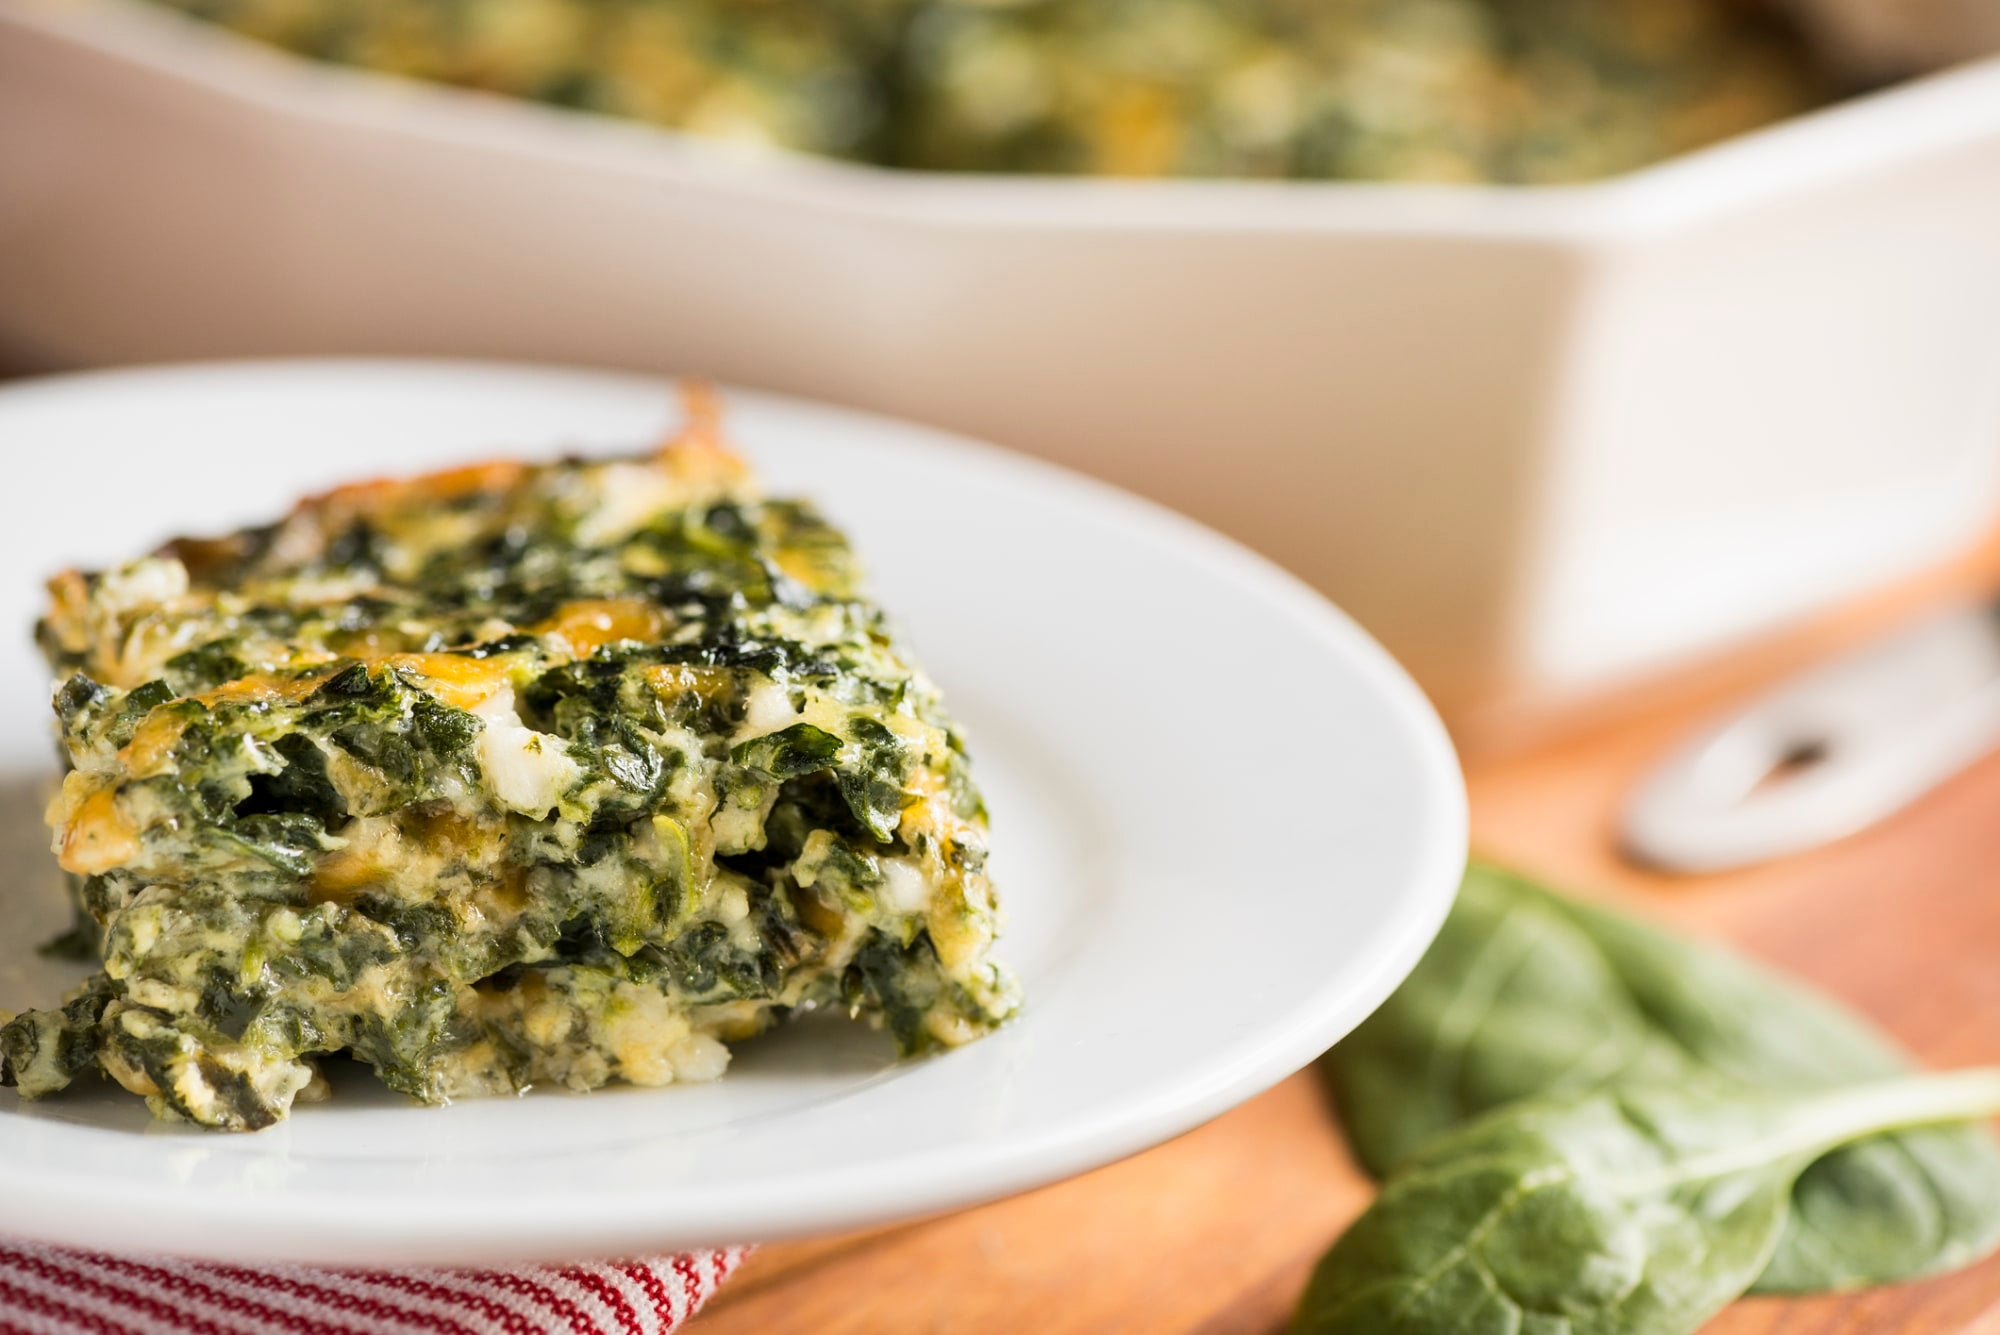 Spinach and Cheese Casserole – Duke's Mayo